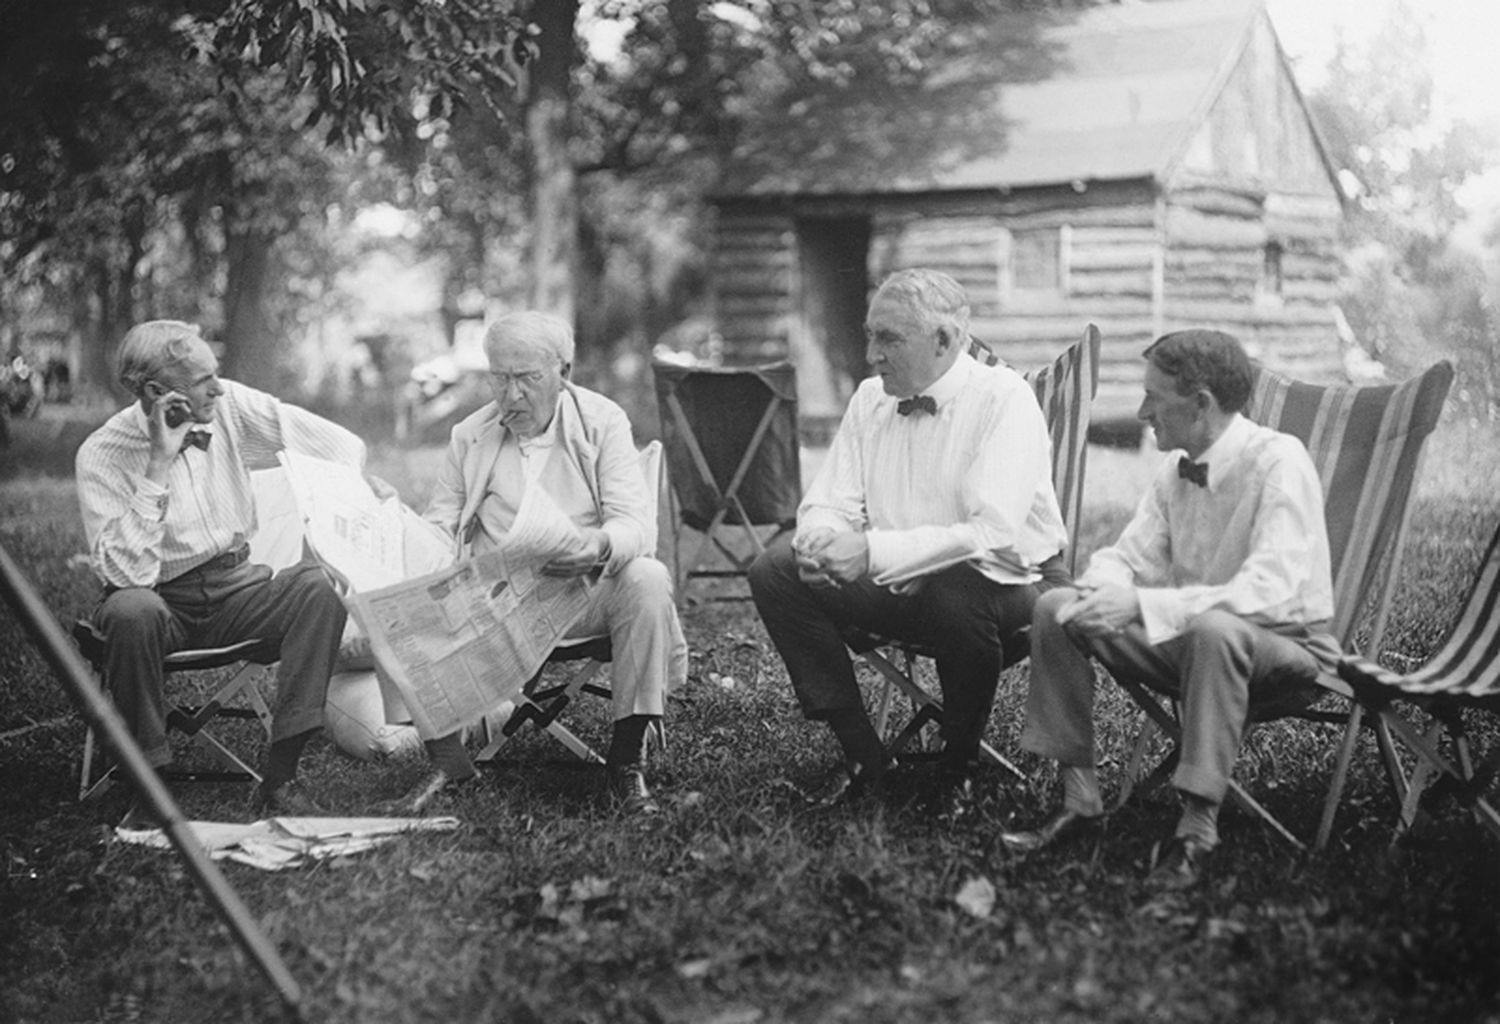 ford, edison, harding and firestone sitting on tripolina chairs 1921 new york times